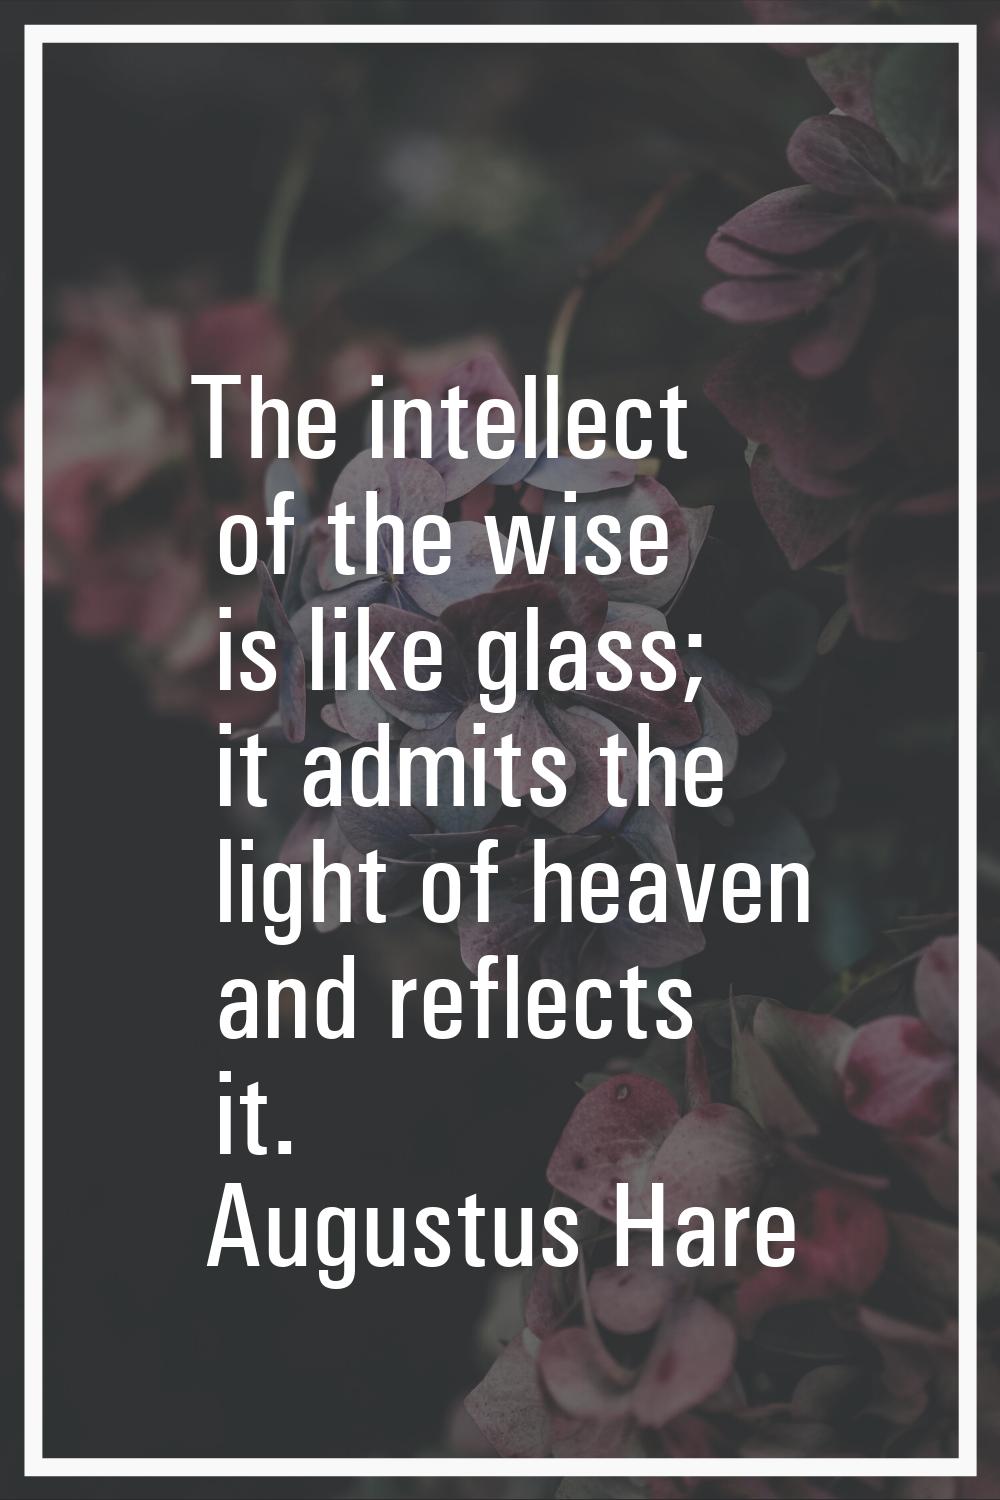 The intellect of the wise is like glass; it admits the light of heaven and reflects it.